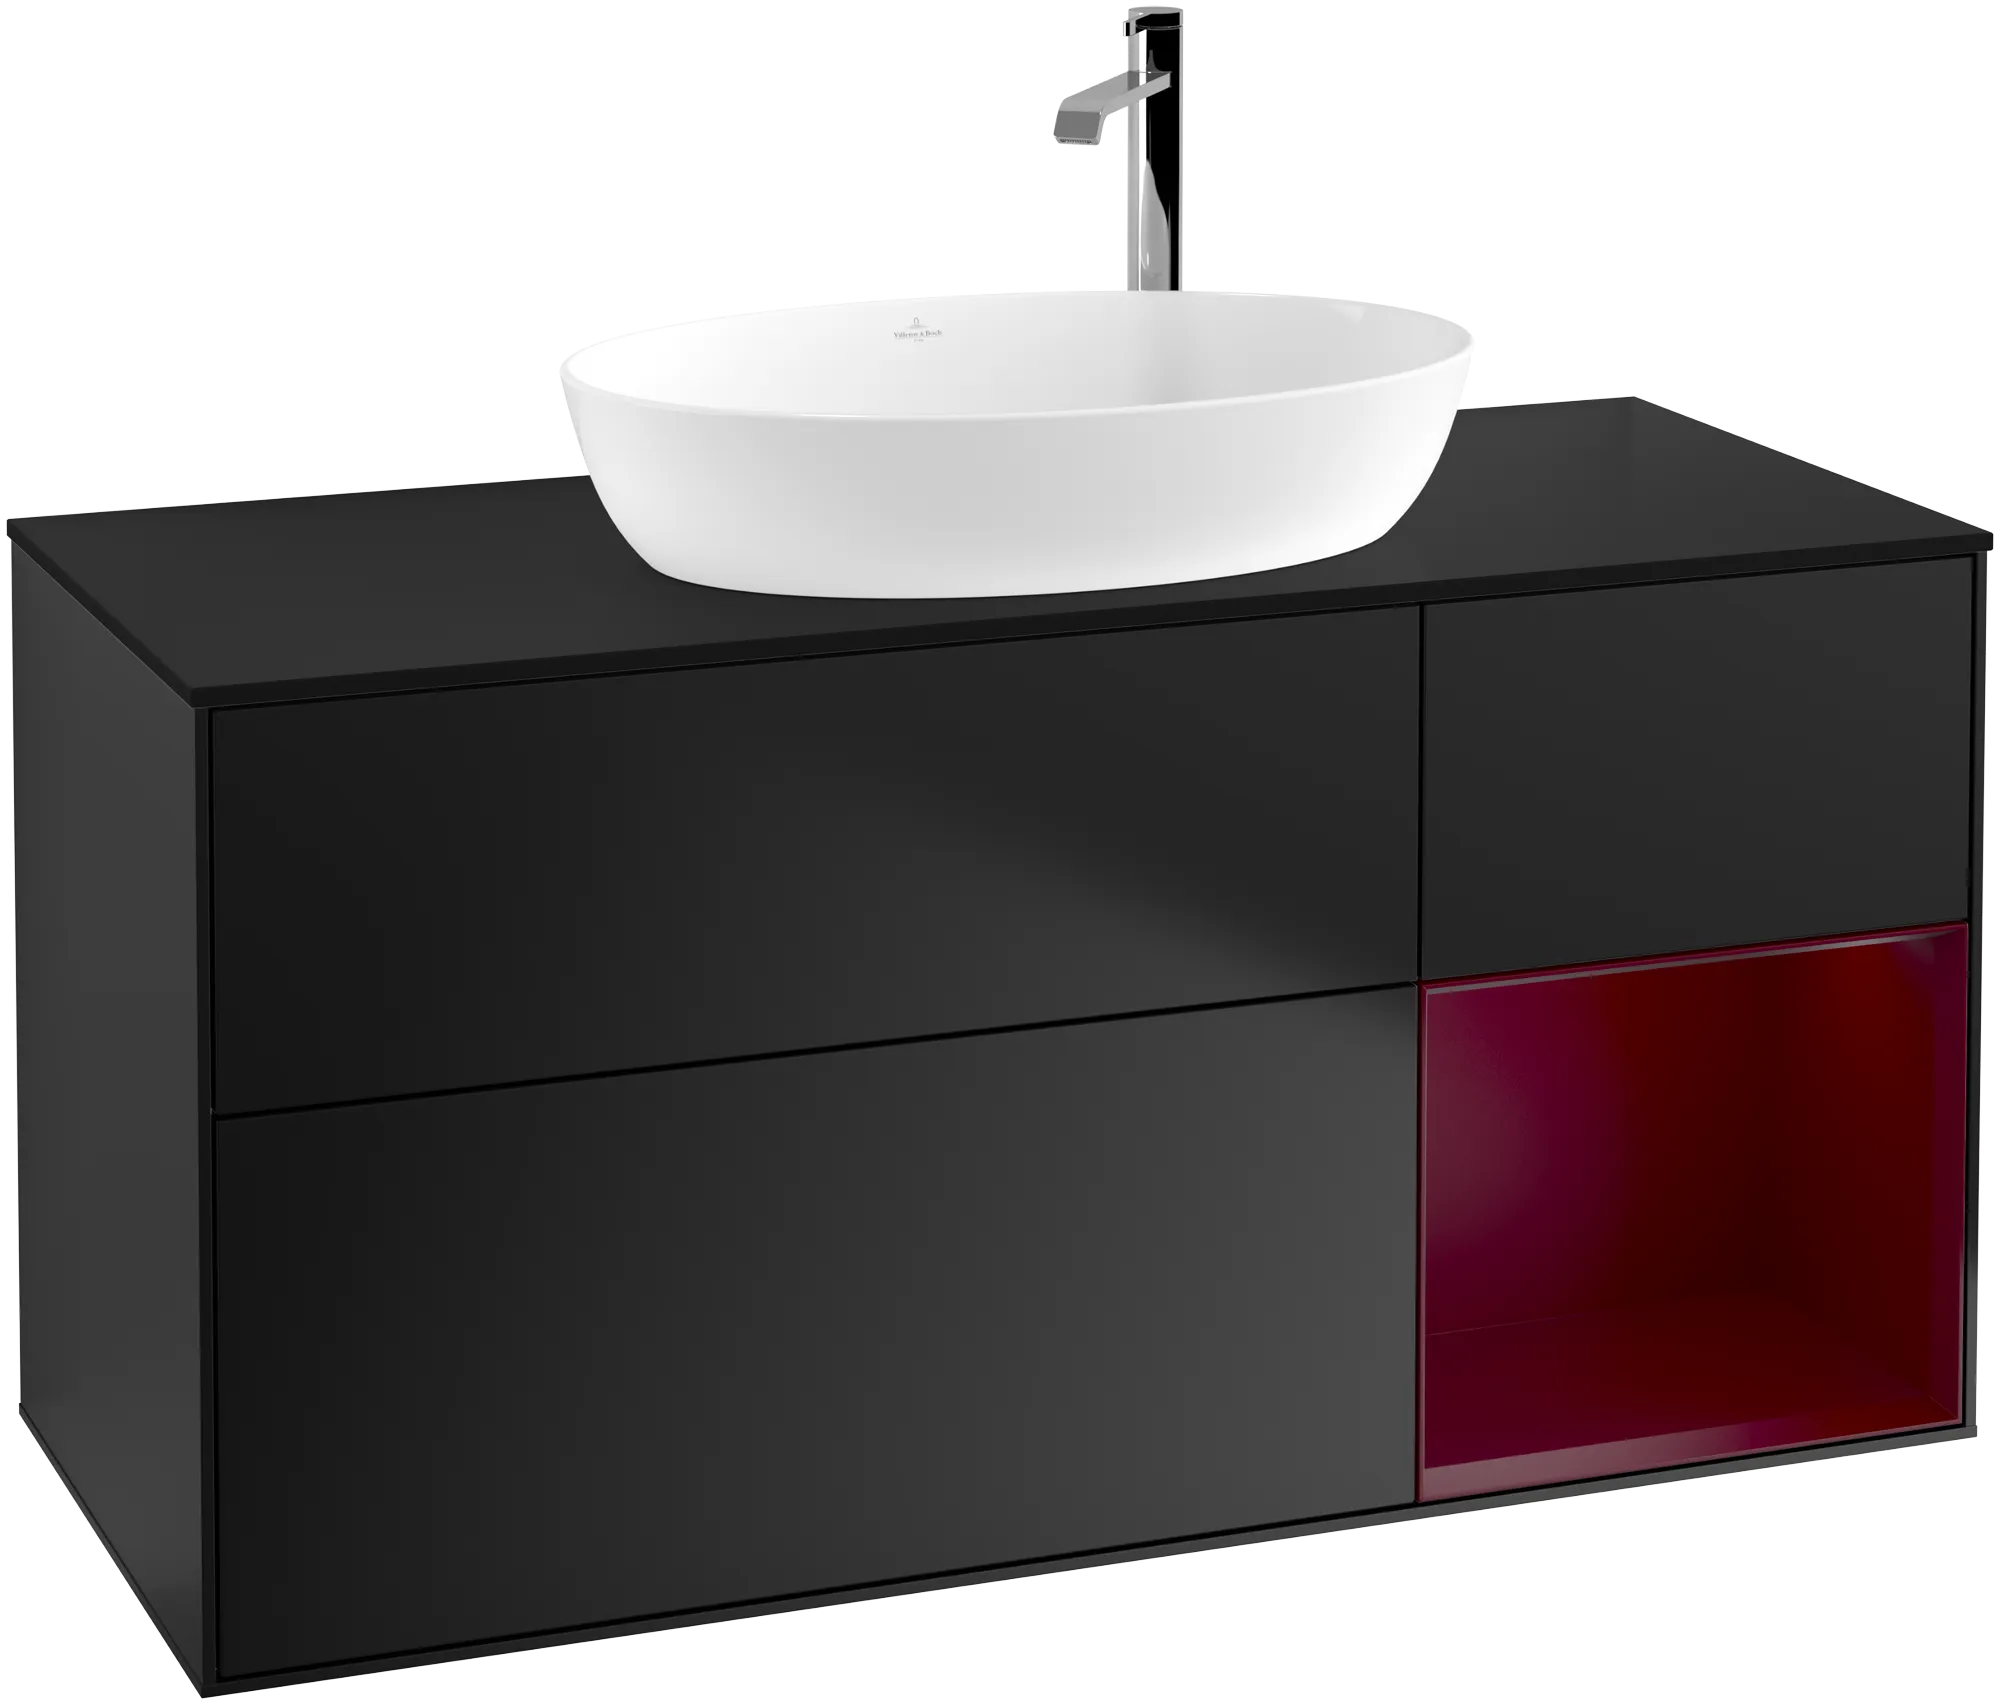 VILLEROY BOCH Finion Vanity unit, with lighting, 3 pull-out compartments, 1200 x 603 x 501 mm, Black Matt Lacquer / Peony Matt Lacquer / Glass Black Matt #G952HBPD resmi